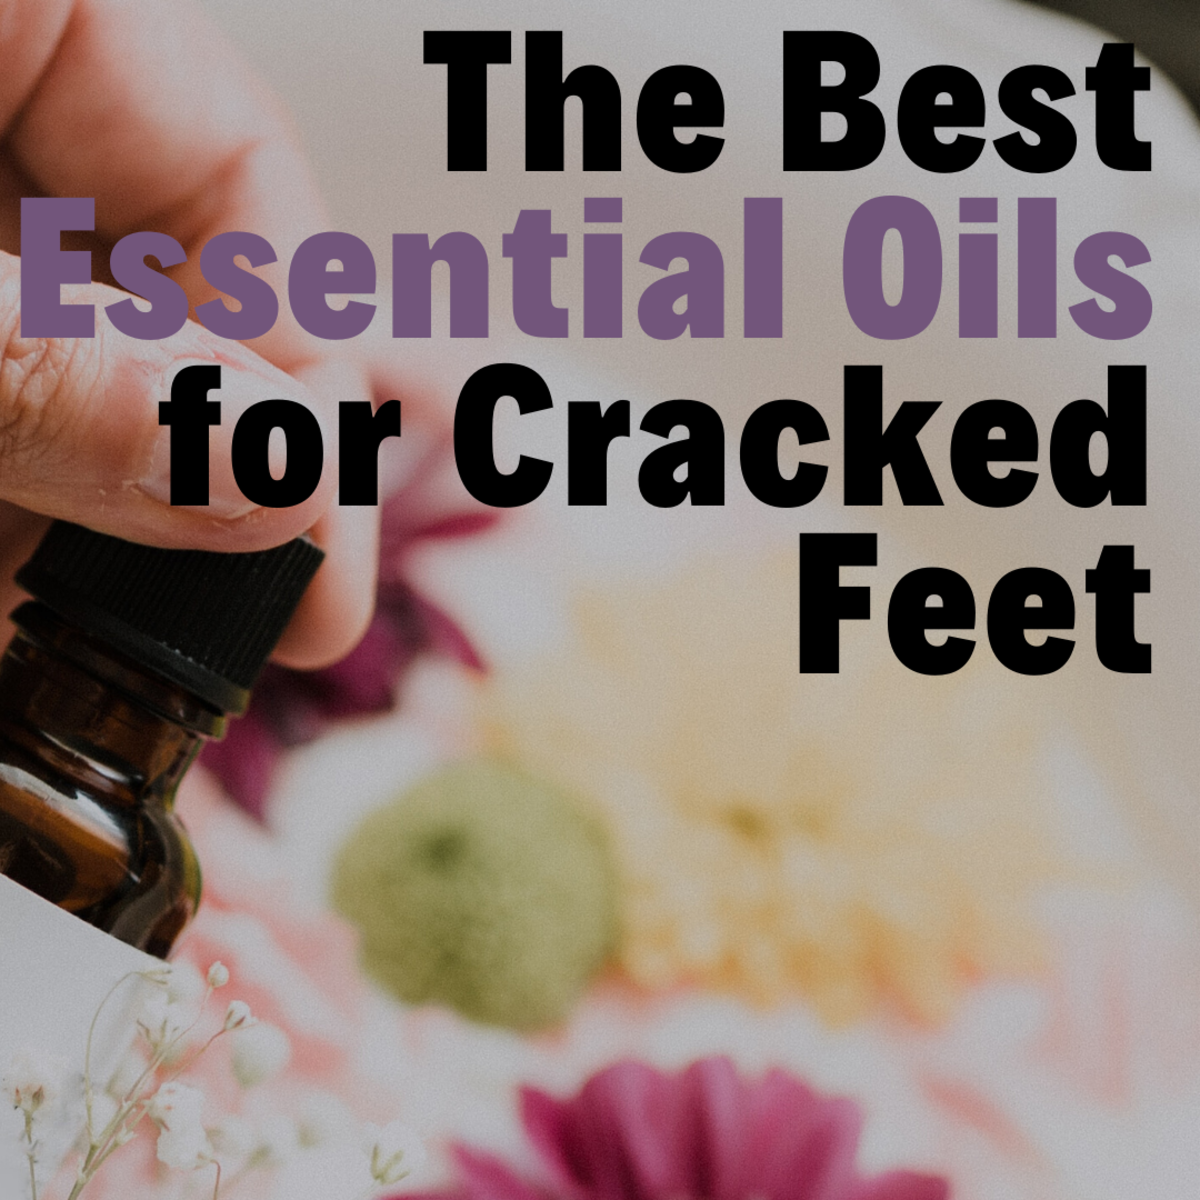 How to heal cracked feet with essential oils.